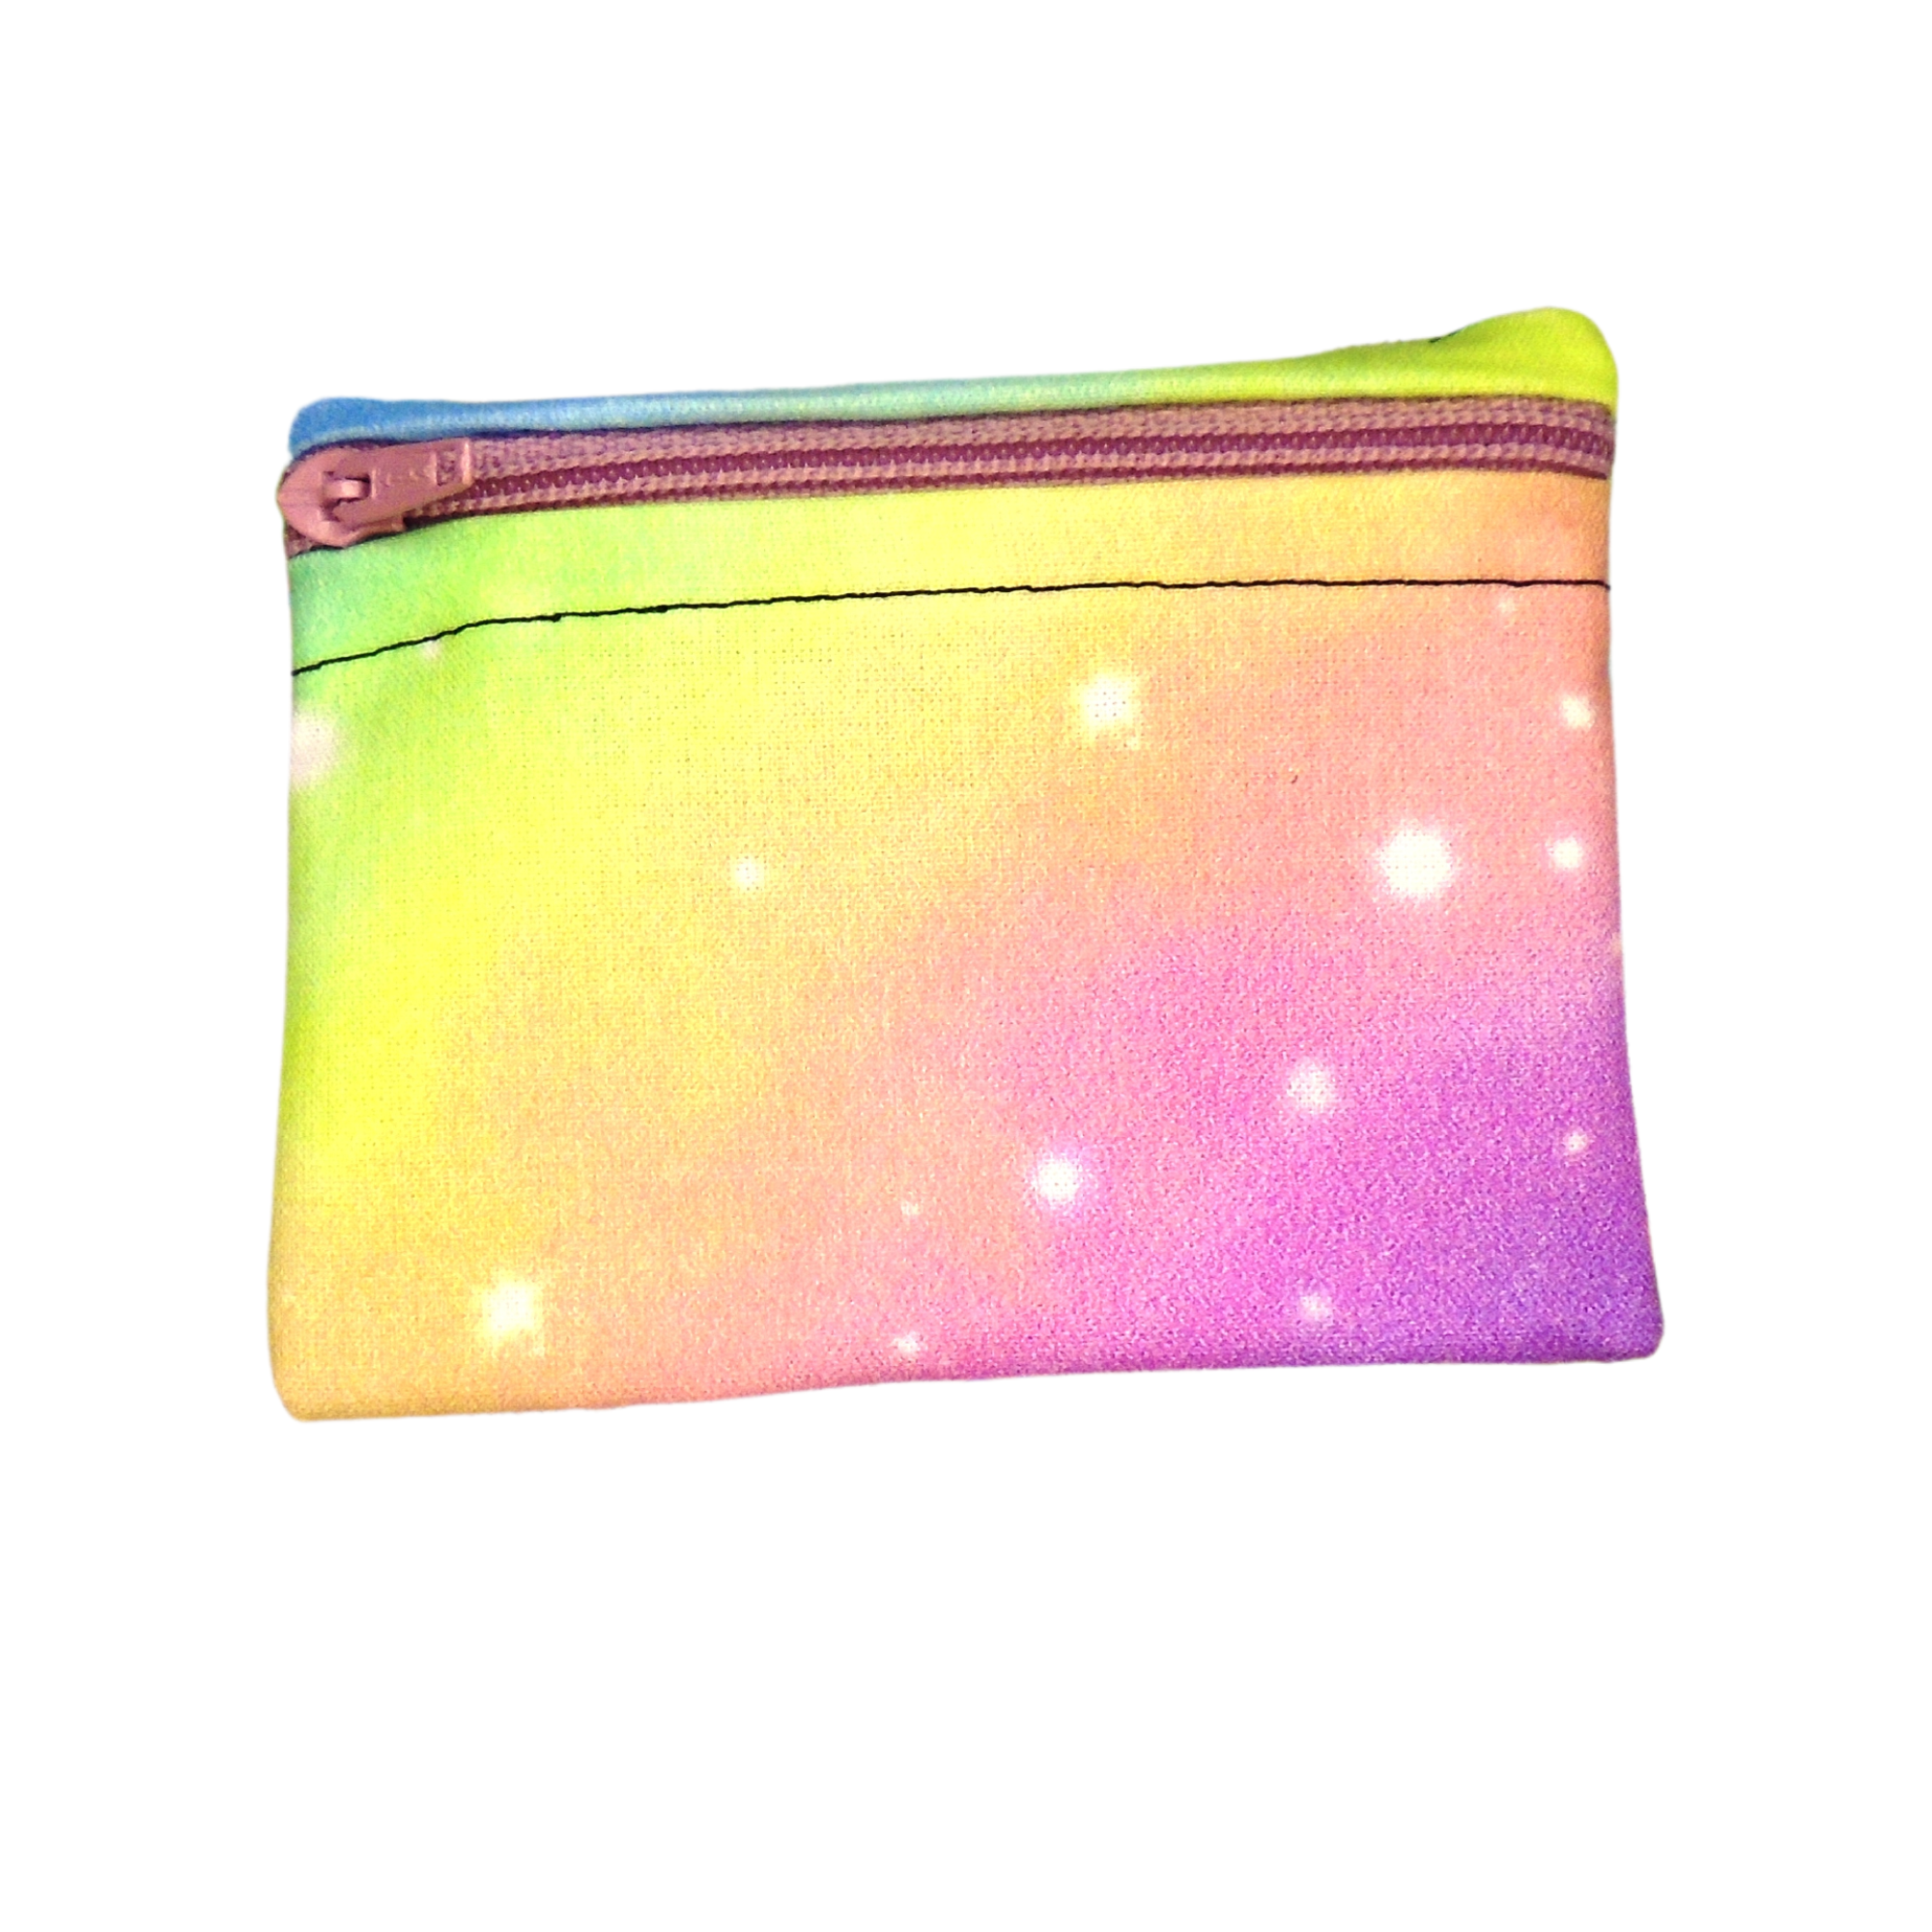 Galaxy Rainbow - Snack Bag - Small Pippins Waterproof Pouch for Food, Makeup and more, Eco-Friendly and Washable Lunch, Travel, and Storage